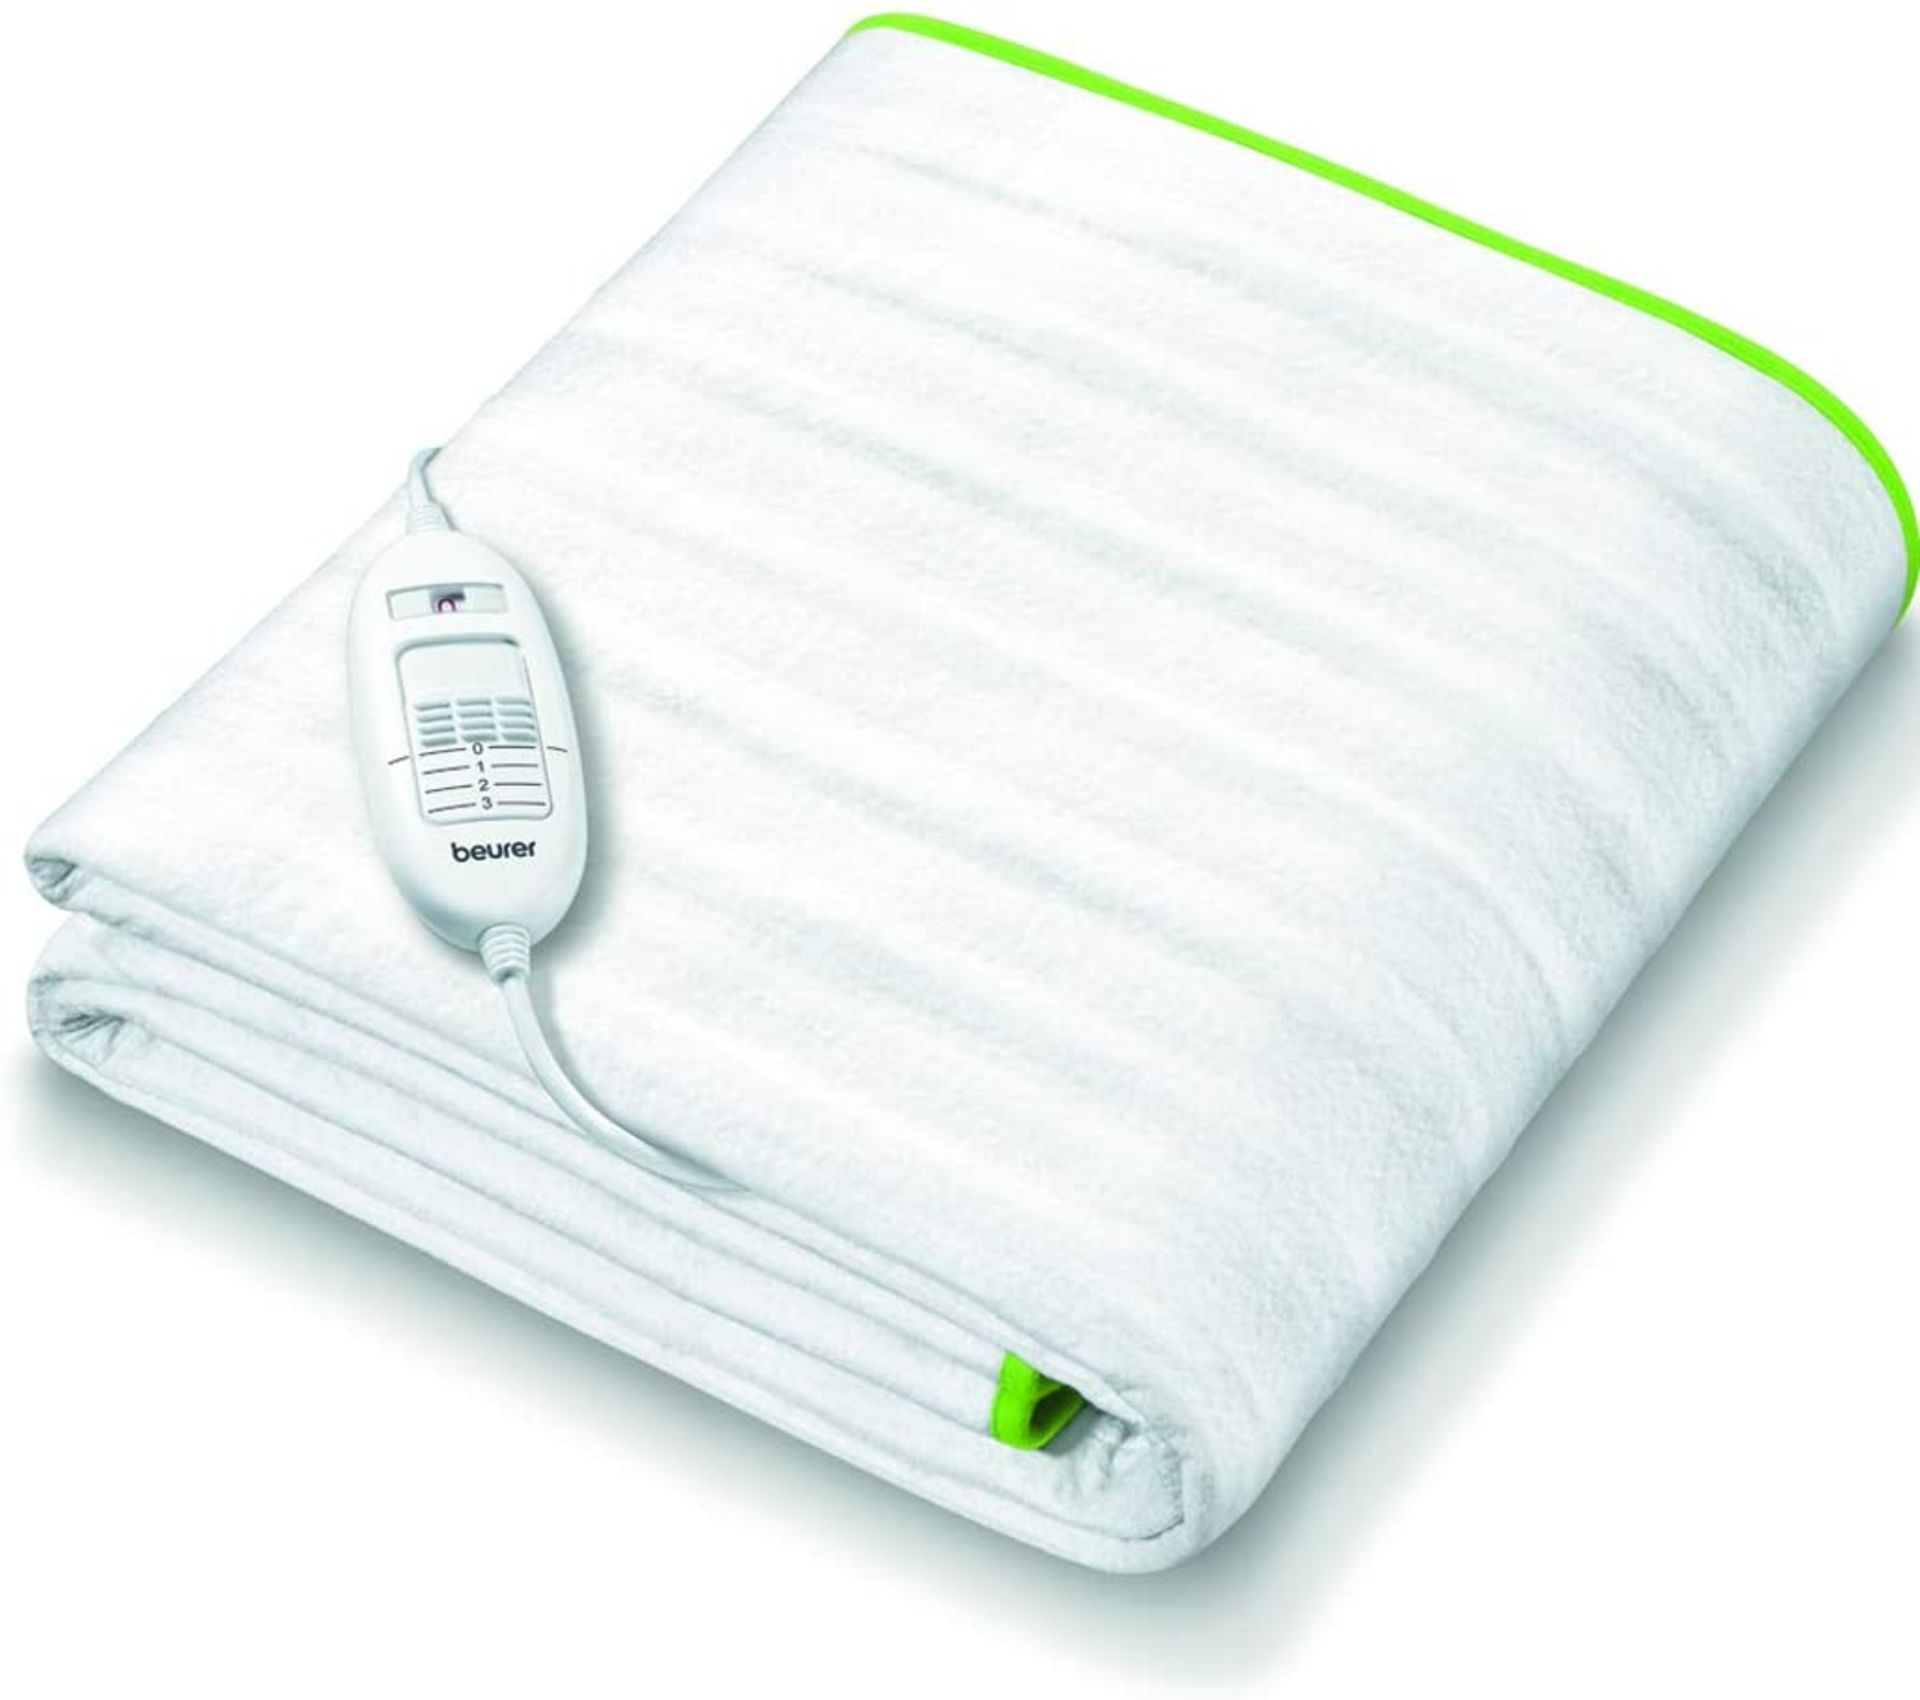 Beurer TS15 Ecologic+ heated underblanket | Ideal single electric blanket with elastic straps to fit